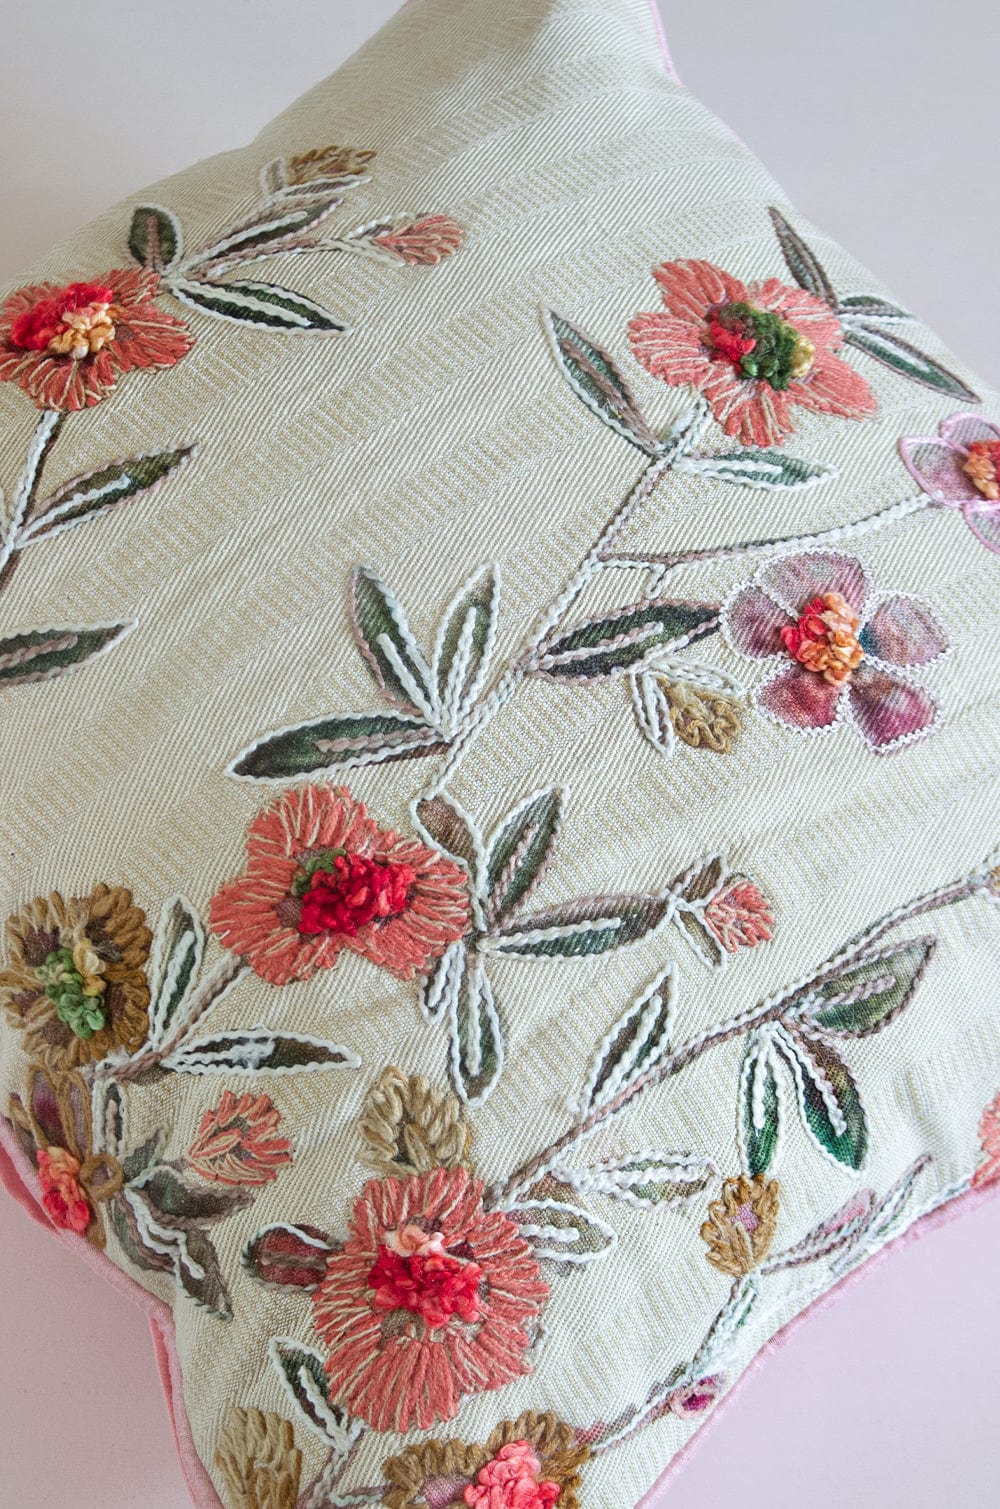 Zoey Hand Embroidered Cushion Cover- Blossoms